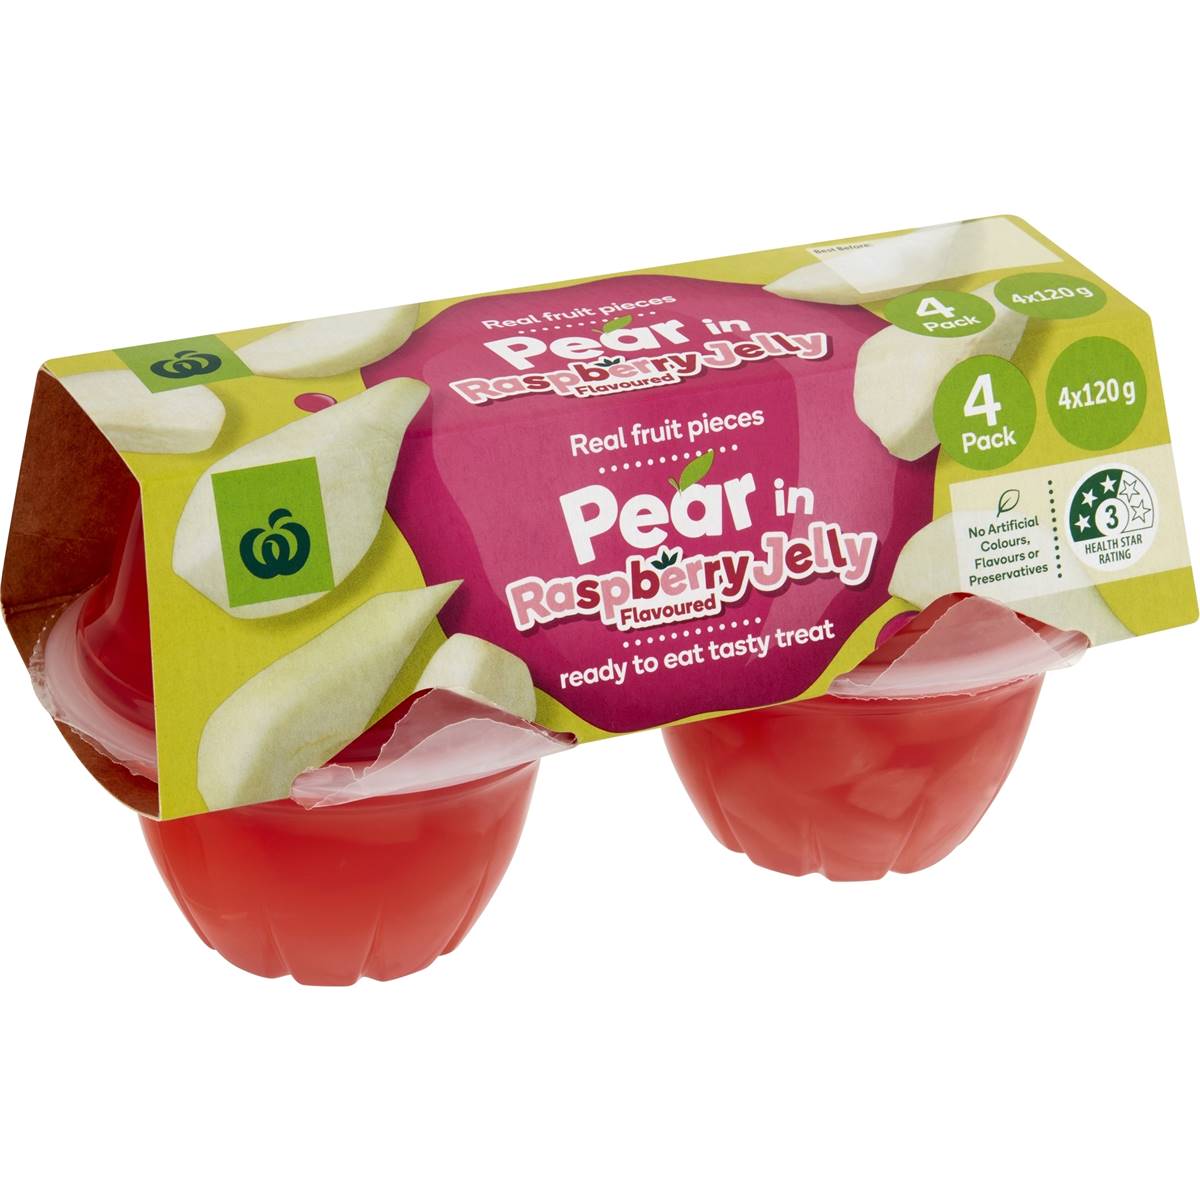 Calories in Woolworths Pear In Raspberry Flavoured Jelly